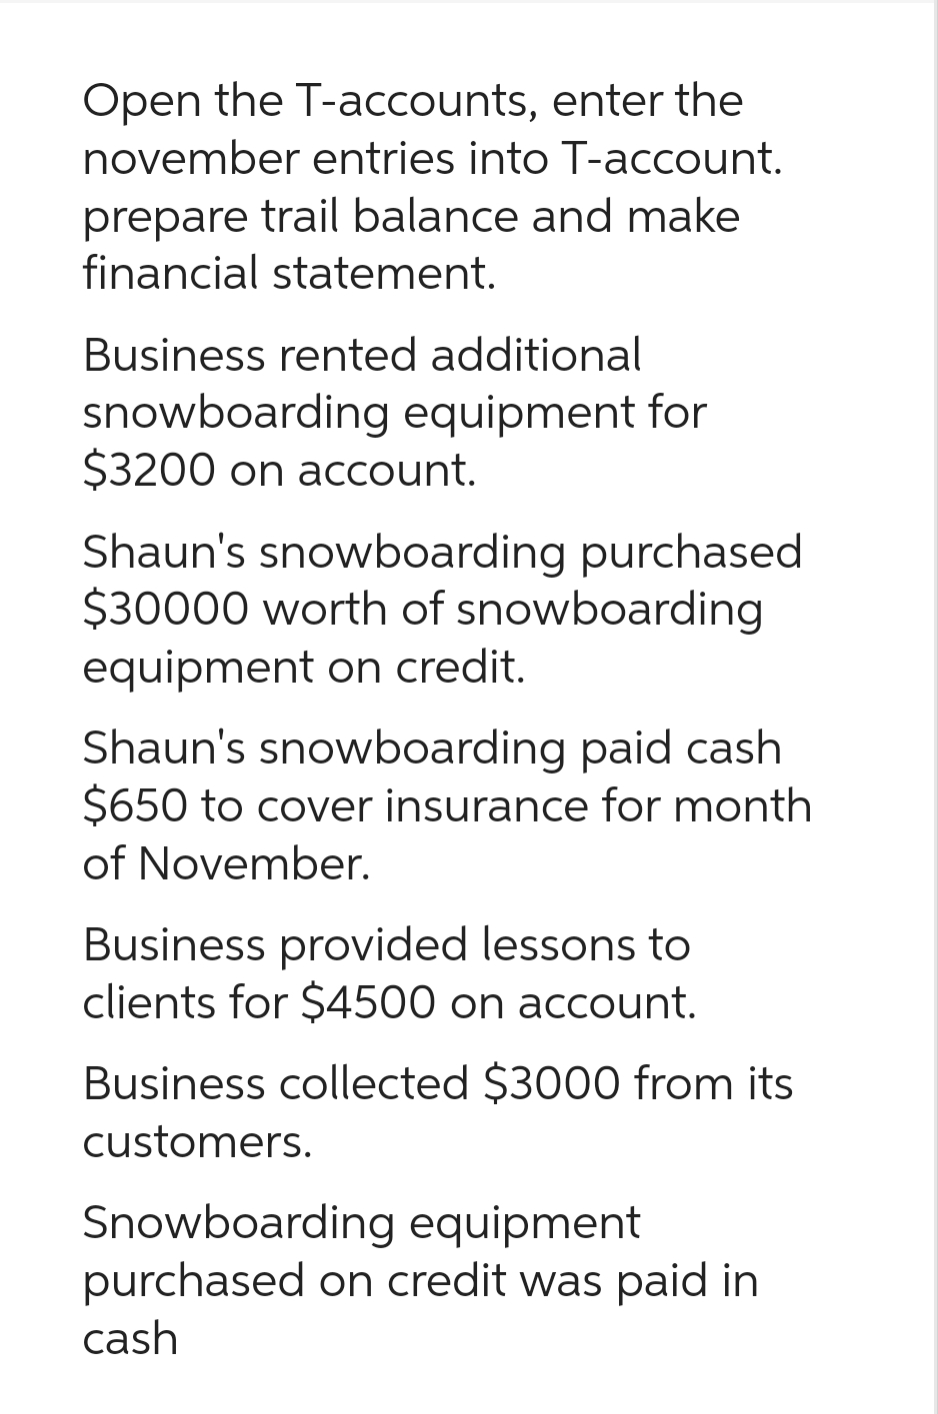 Open the T-accounts, enter the
november entries into T-account.
prepare trail balance and make
financial statement.
Business rented additional
snowboarding equipment for
$3200 on account.
Shaun's snowboarding purchased
$30000 worth of snowboarding
equipment on credit.
Shaun's snowboarding paid cash
$650 to cover insurance for month
of November.
Business provided lessons to
clients for $4500 on account.
Business collected $3000 from its
customers.
Snowboarding equipment
purchased on credit was paid in
cash